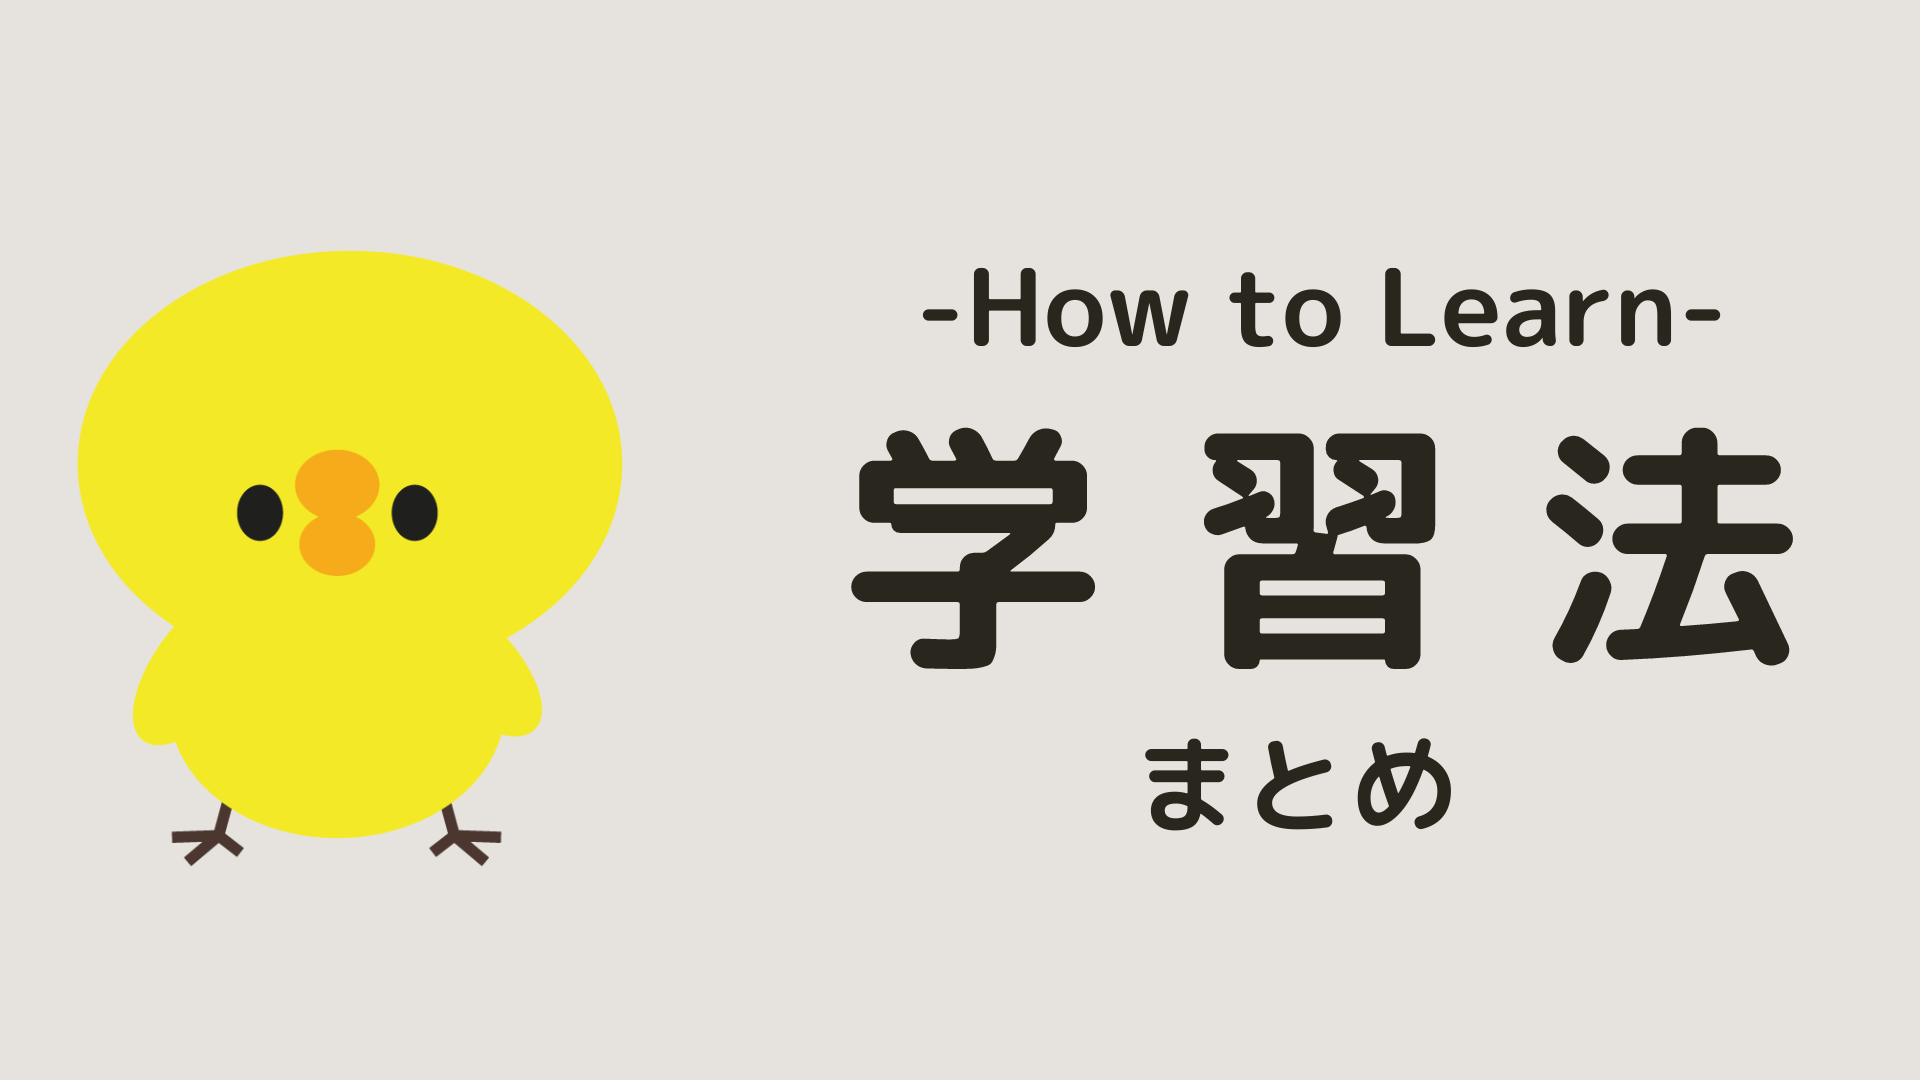 How to Learn